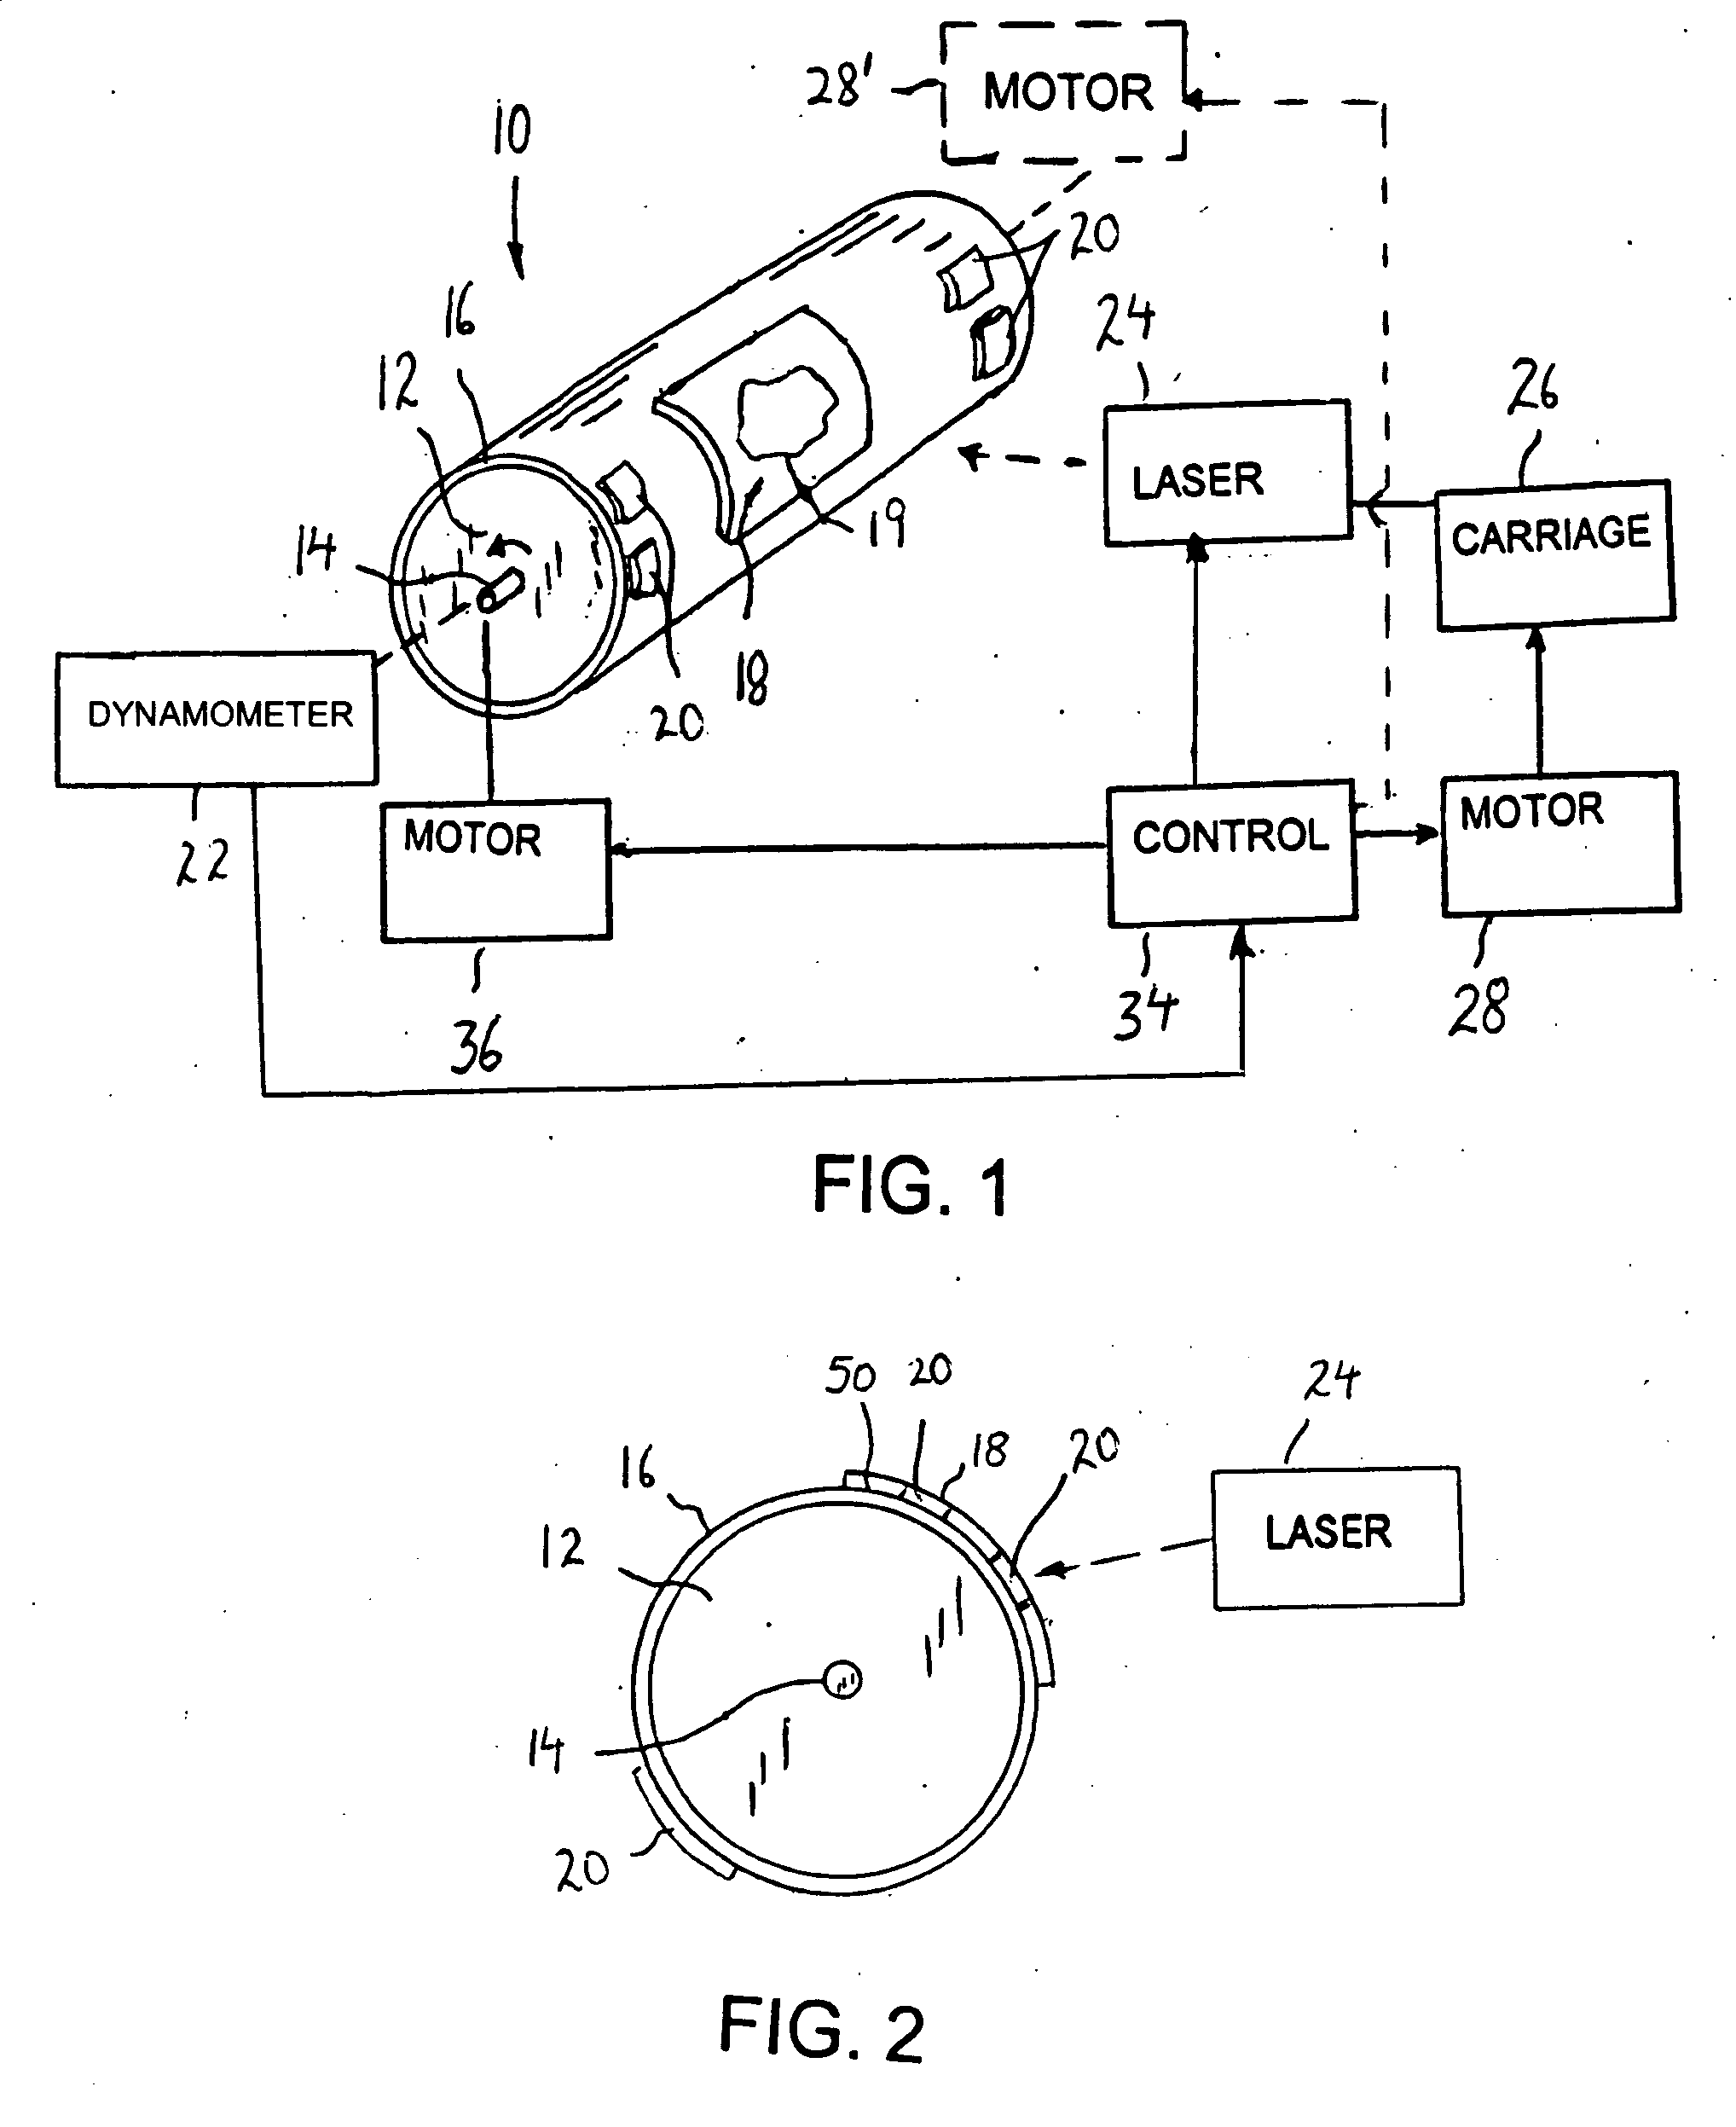 Apparatus and method for balancing a printing roller having an image producing area on its outer surface